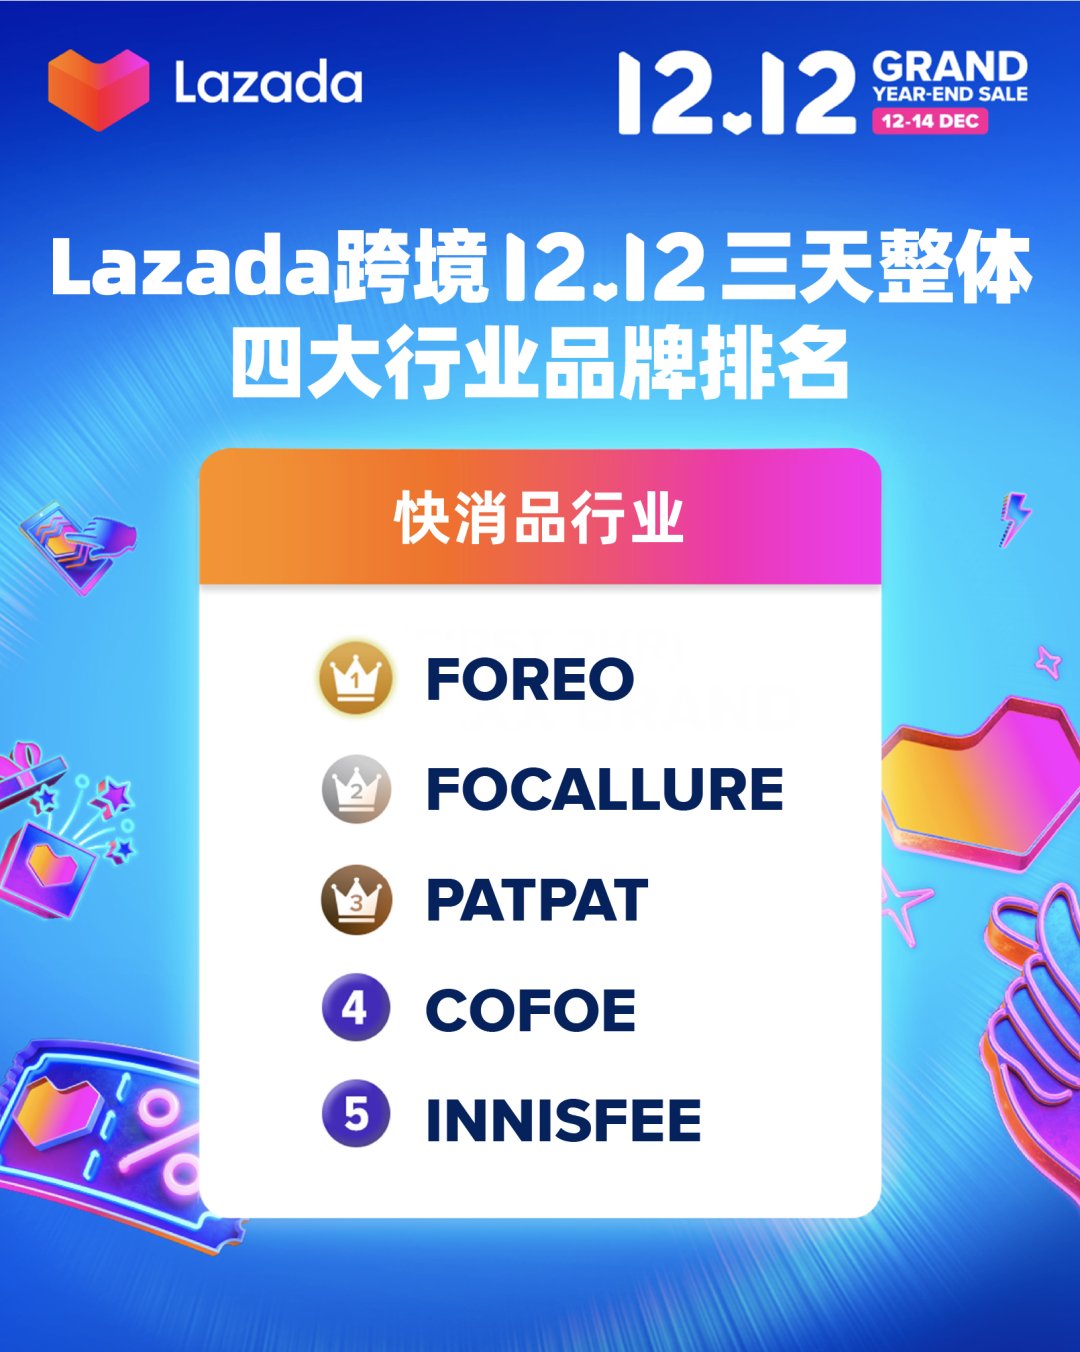 This is the most comprehensive report of the e-commerce platform Lazada 12.12!